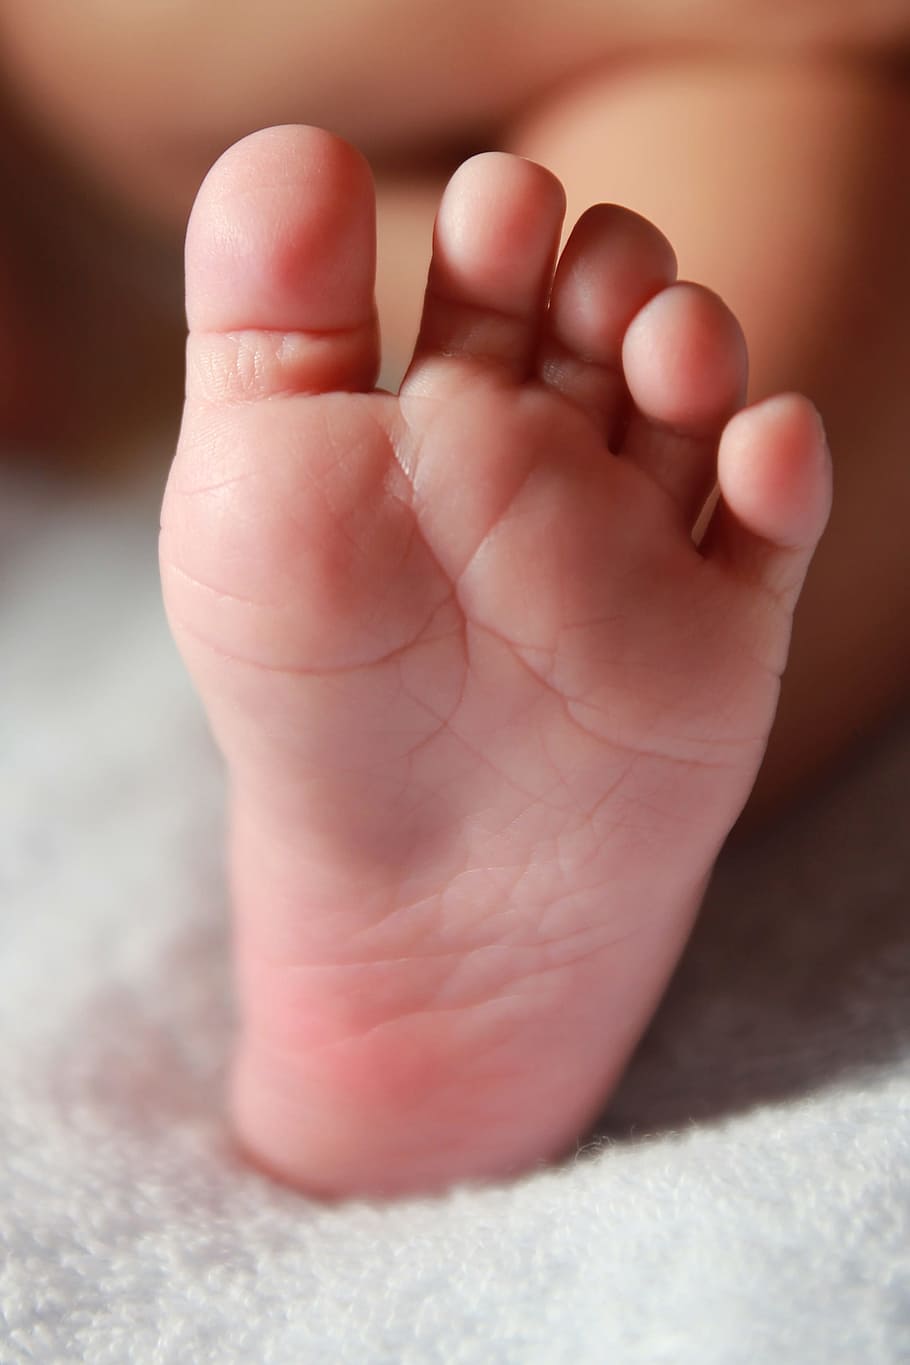 left person's foot, Newborn, Infant, Leg, baby foot, child, small